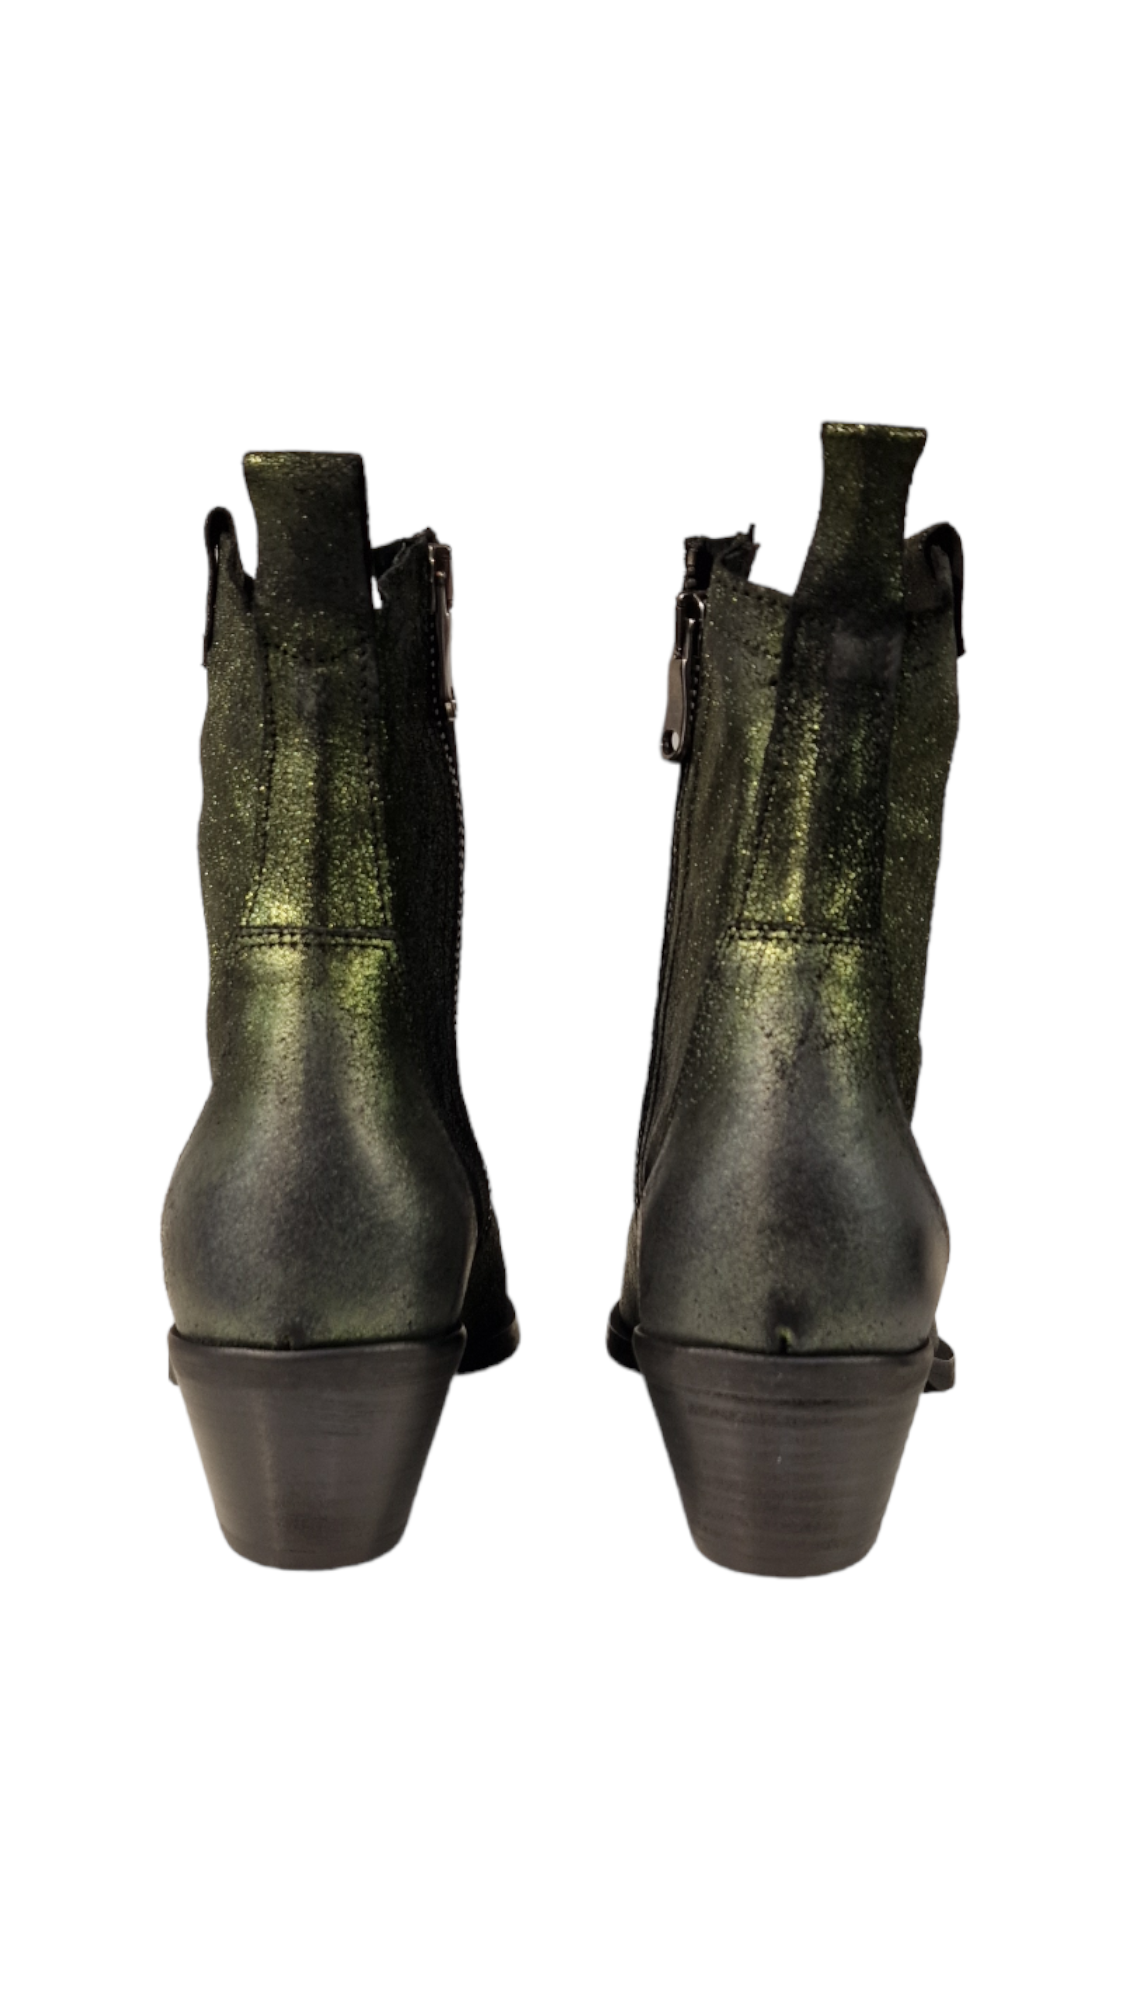 Green leather boot